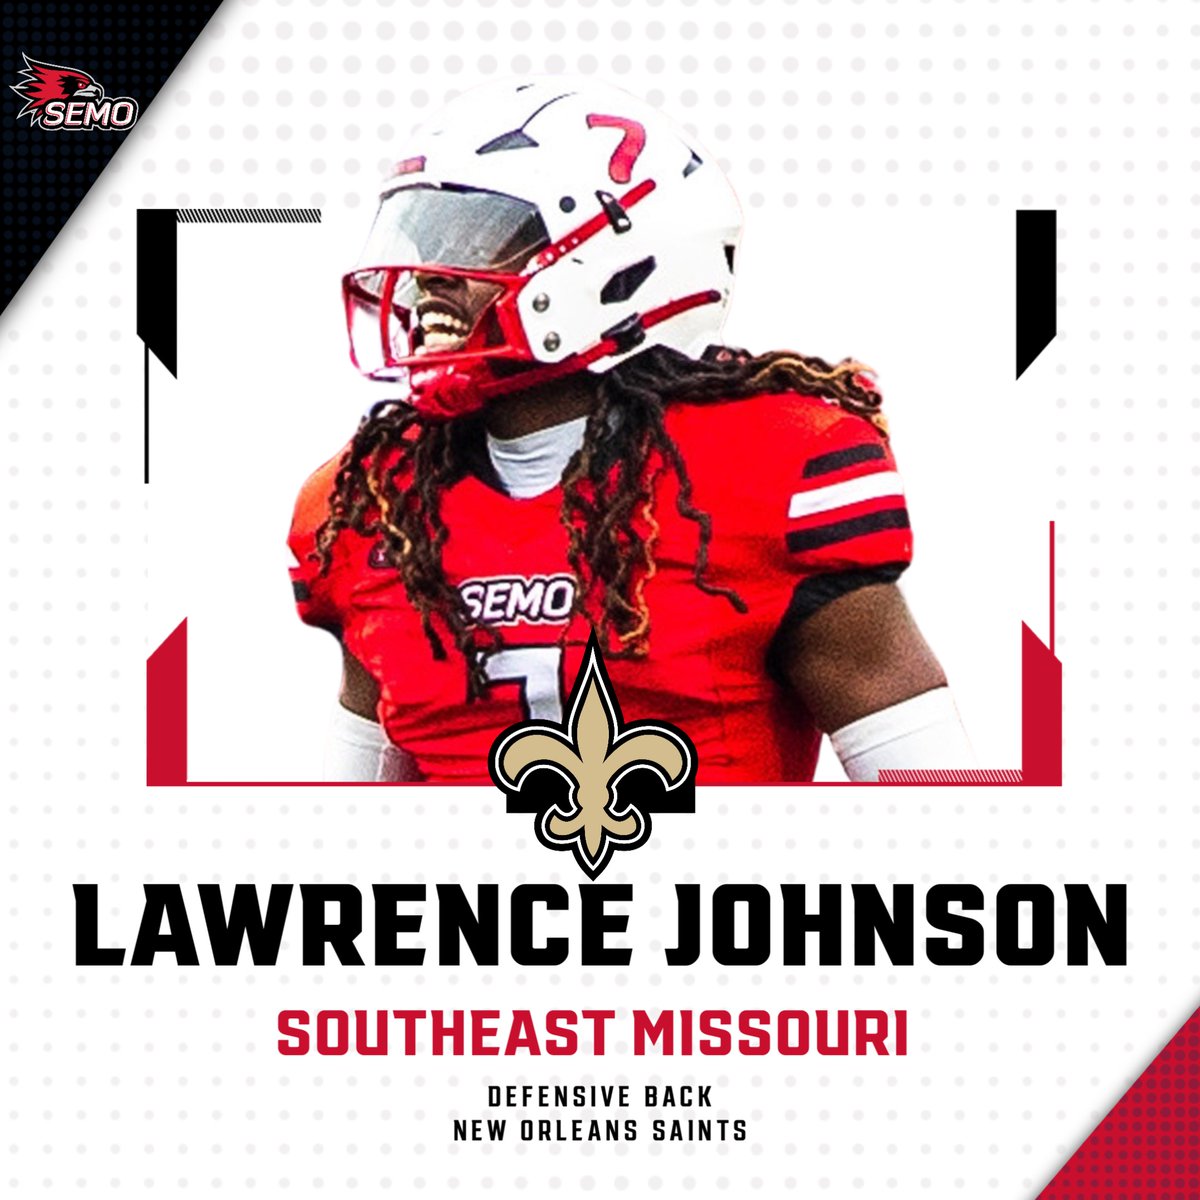 Southeast Missouri defensive back Lawrence Johnson is going to the New Orleans Saints as an undrafted free agent. Congratulations Lawrence!